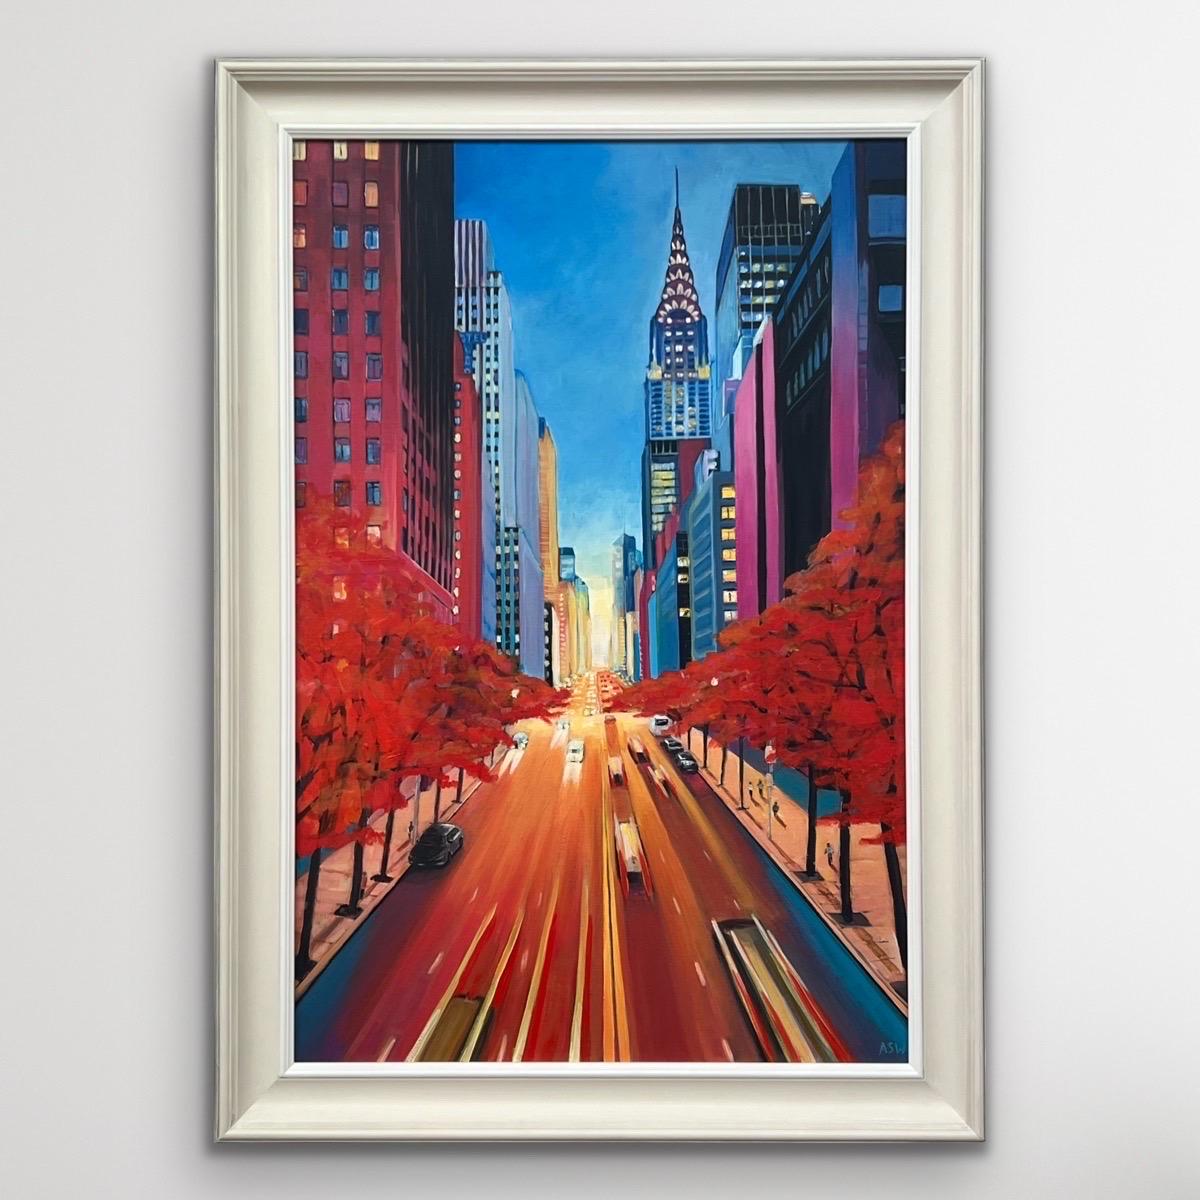 Painting of the Chrysler Building 42nd Street New York City by Contemporary British Artist, Angela Wakefield.

Art measures 24 x 36 inches
Frame measures 30 x 42 inches

Framed in a high quality off-white hand-finished wooden moulding

Colours: